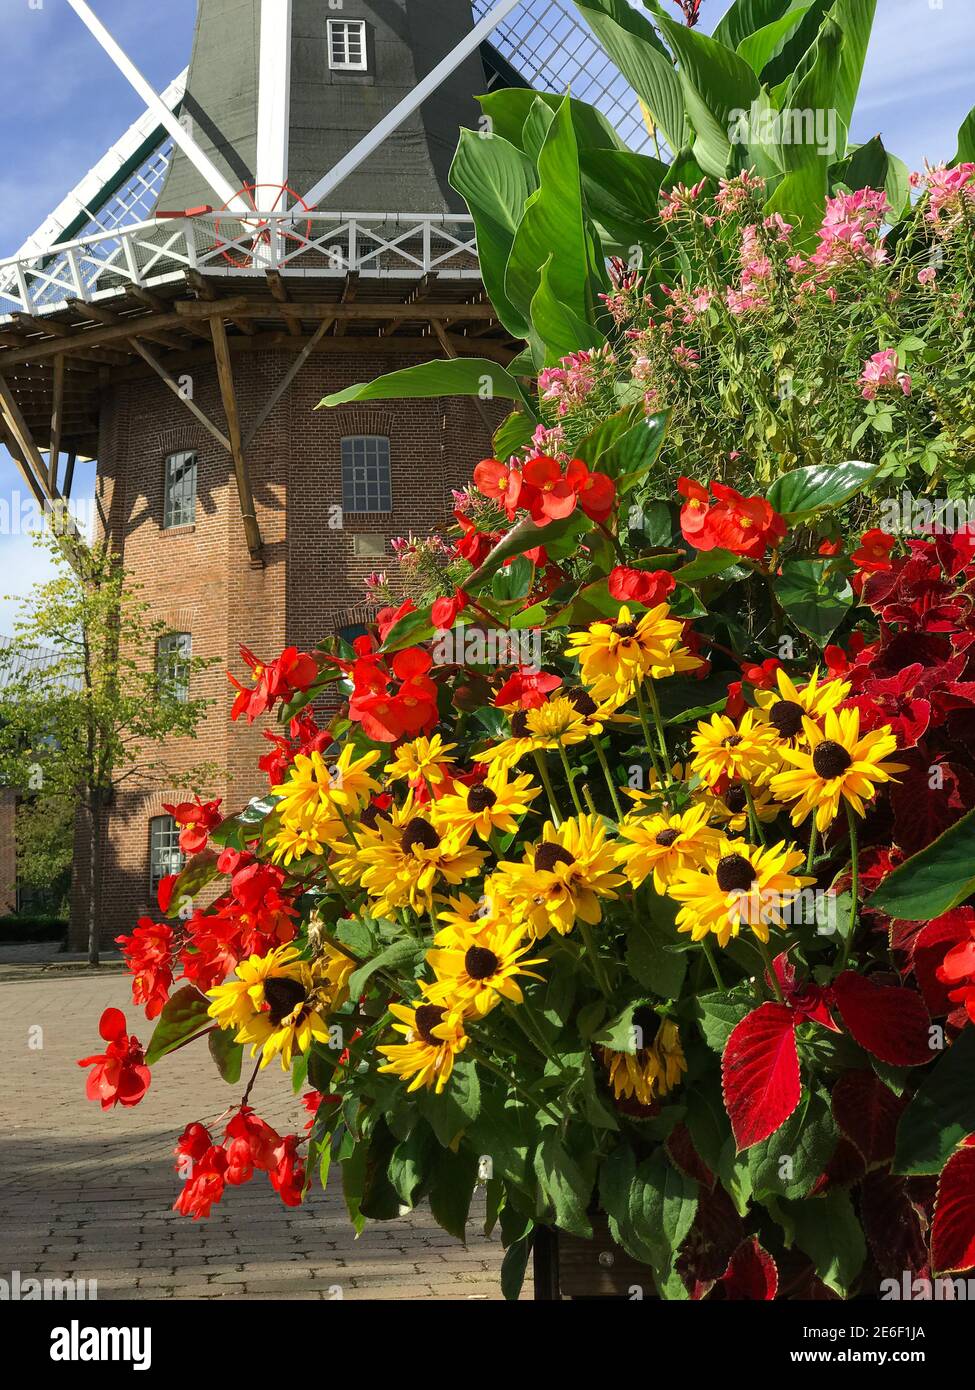 A large planter filled with red begonias, yellow rudbeckias and other colorful flowers has been placed in front of the historical windmill. Stock Photo